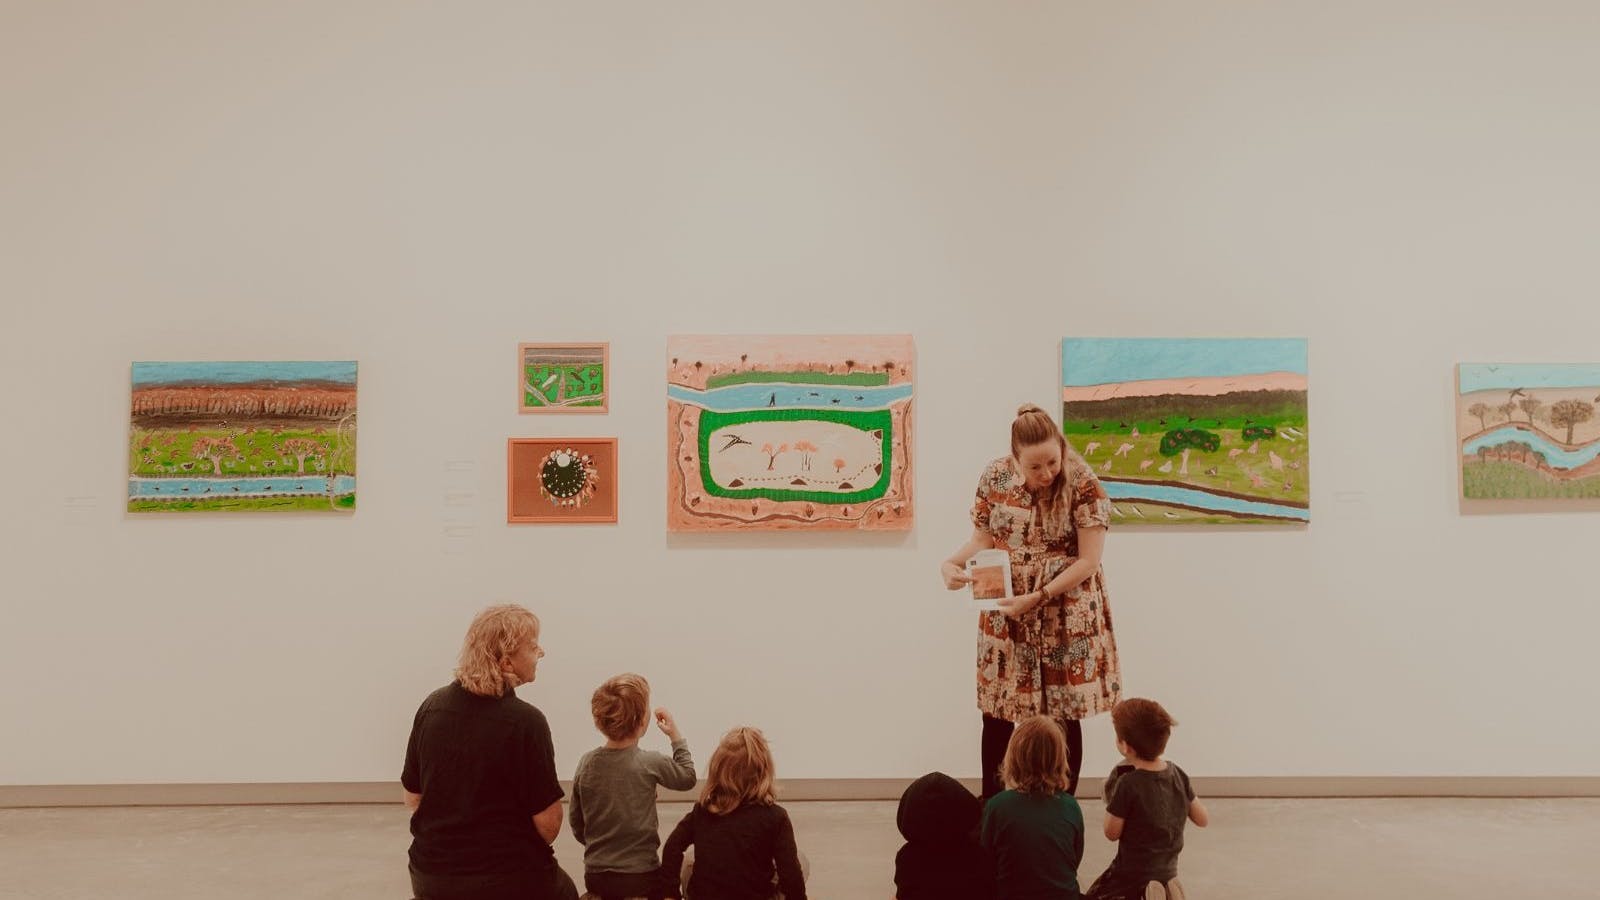 Children guided tour in art museum